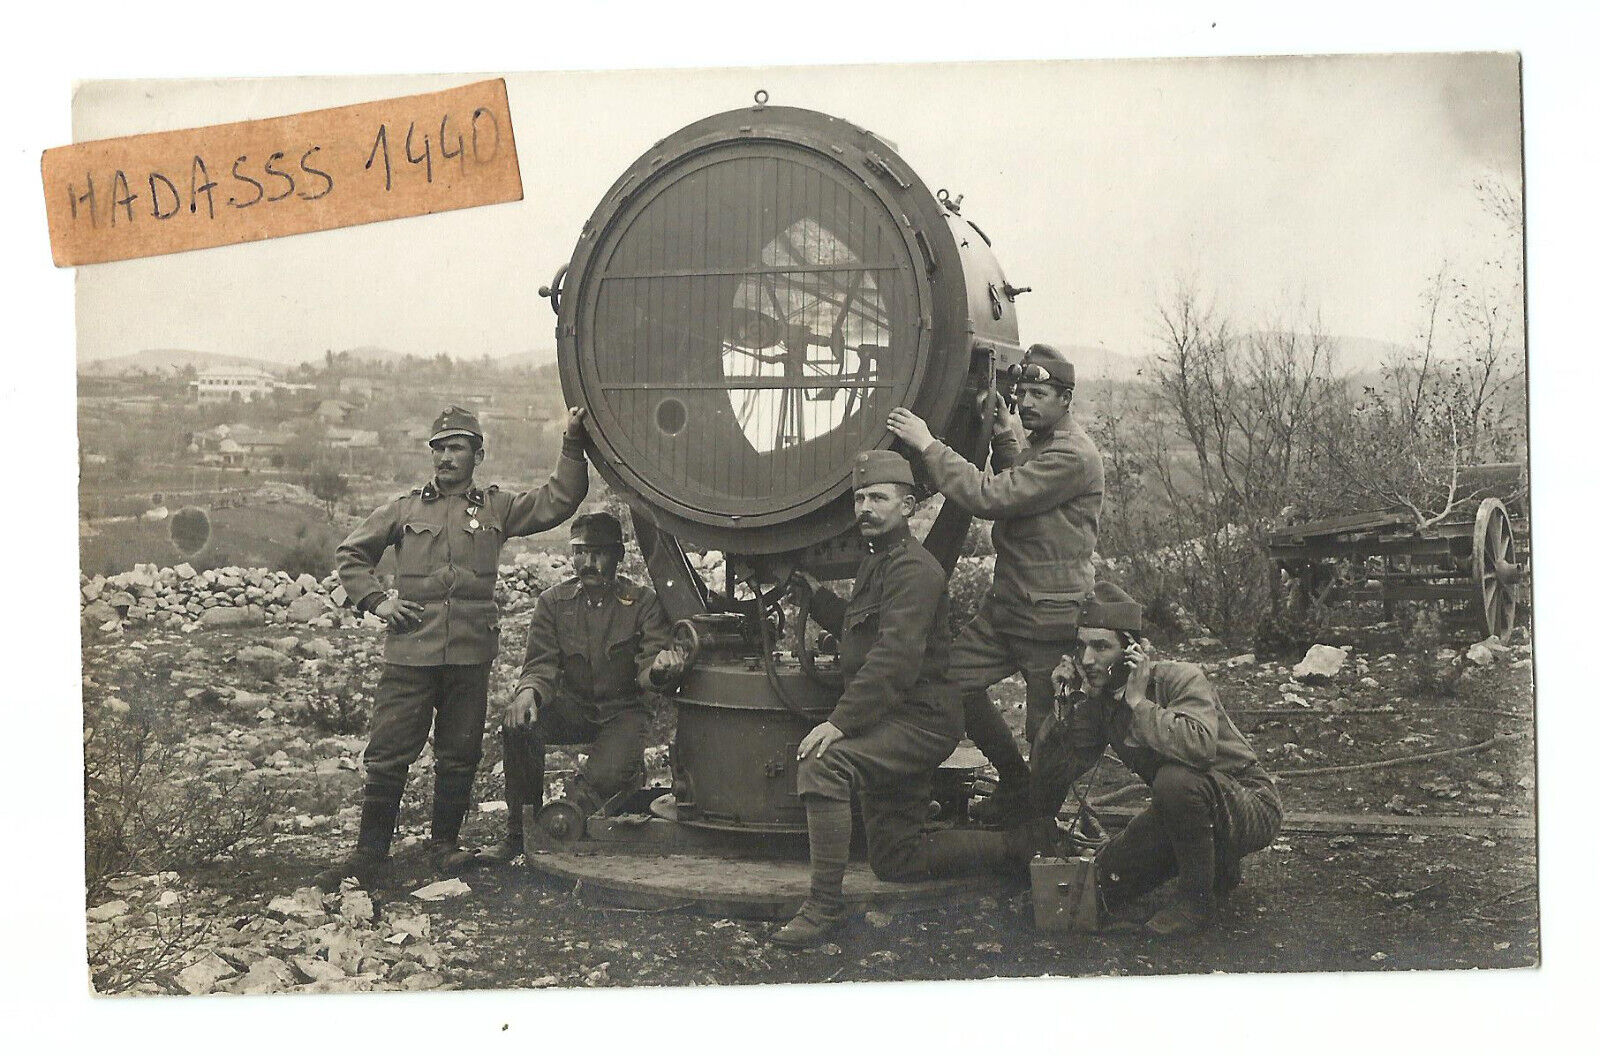 AUSTRO - HUNGARIAN SOLDIERS AND Large reflector , TOP 